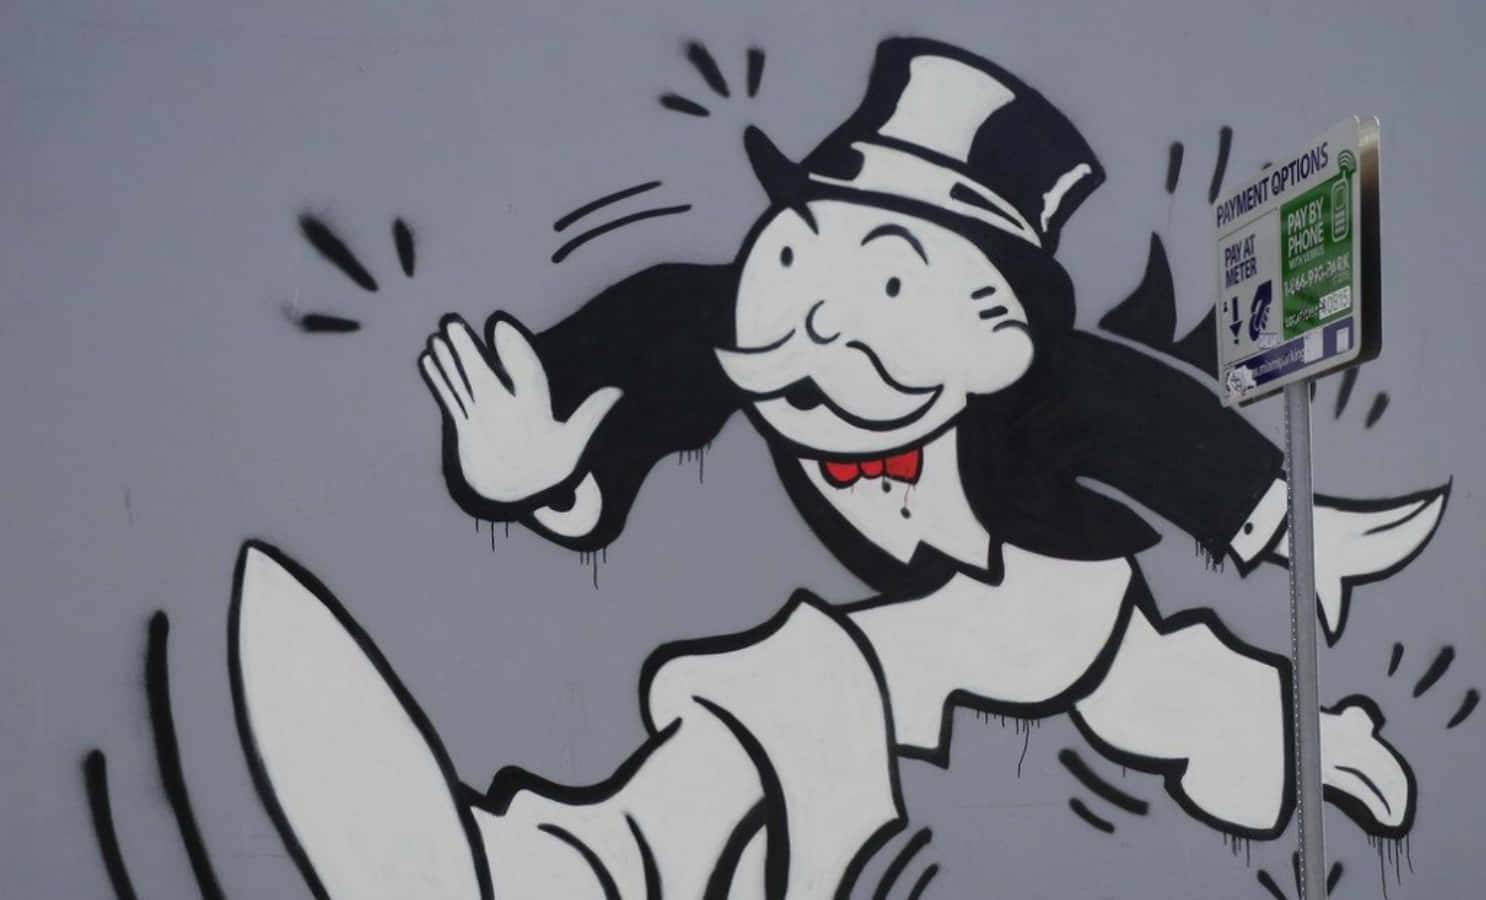 Roll the dice and take a chance on being a millionaire with Monopoly Man